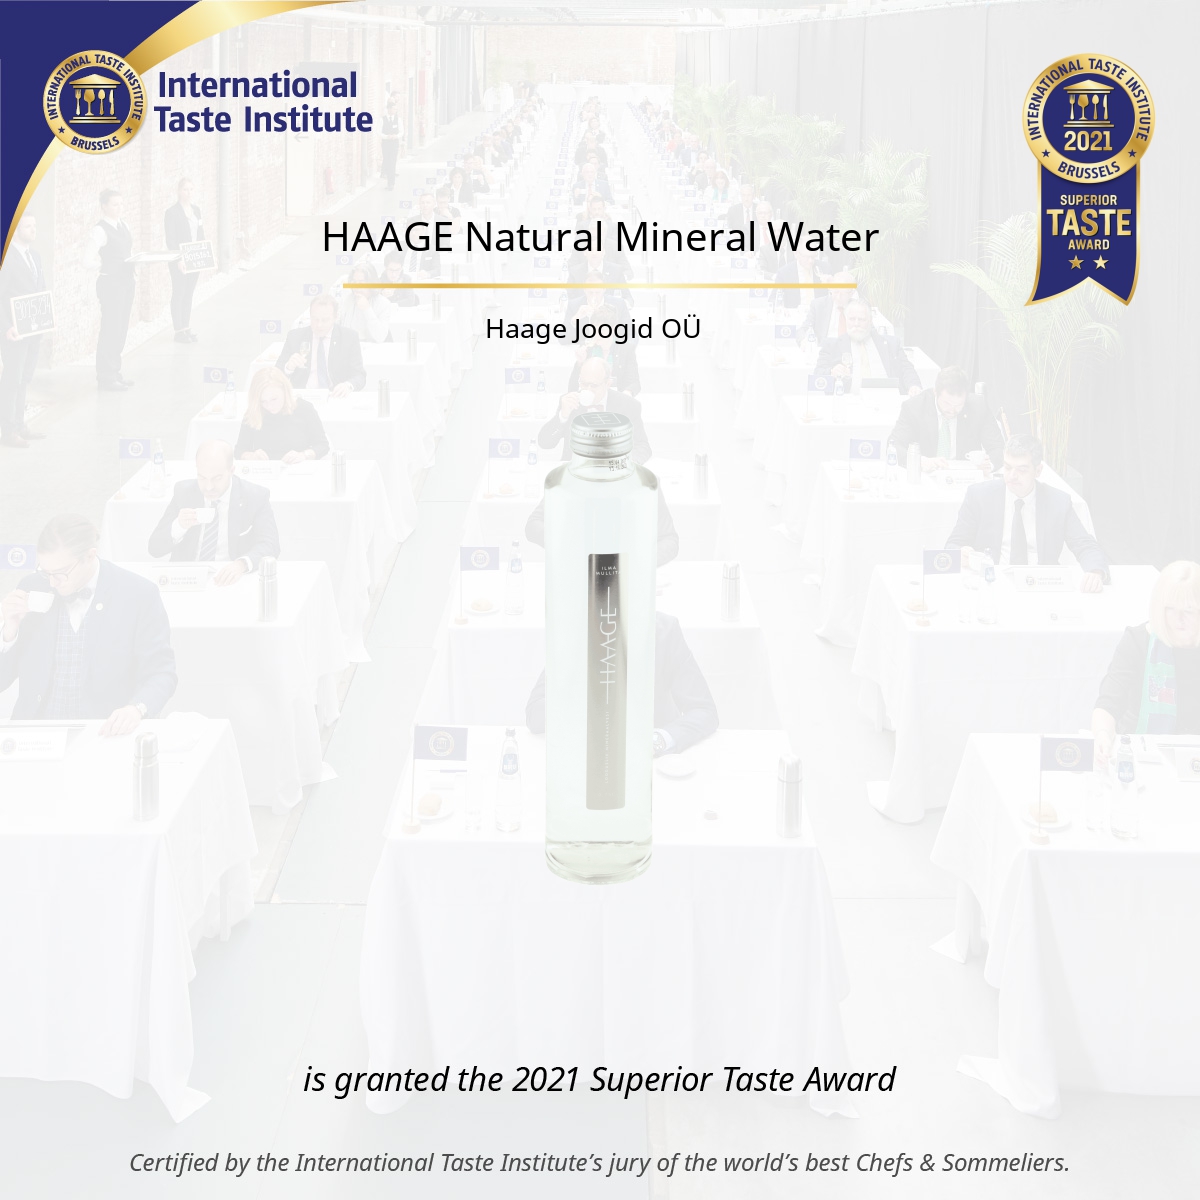 Square image of HAAGE Natural Mineral Water